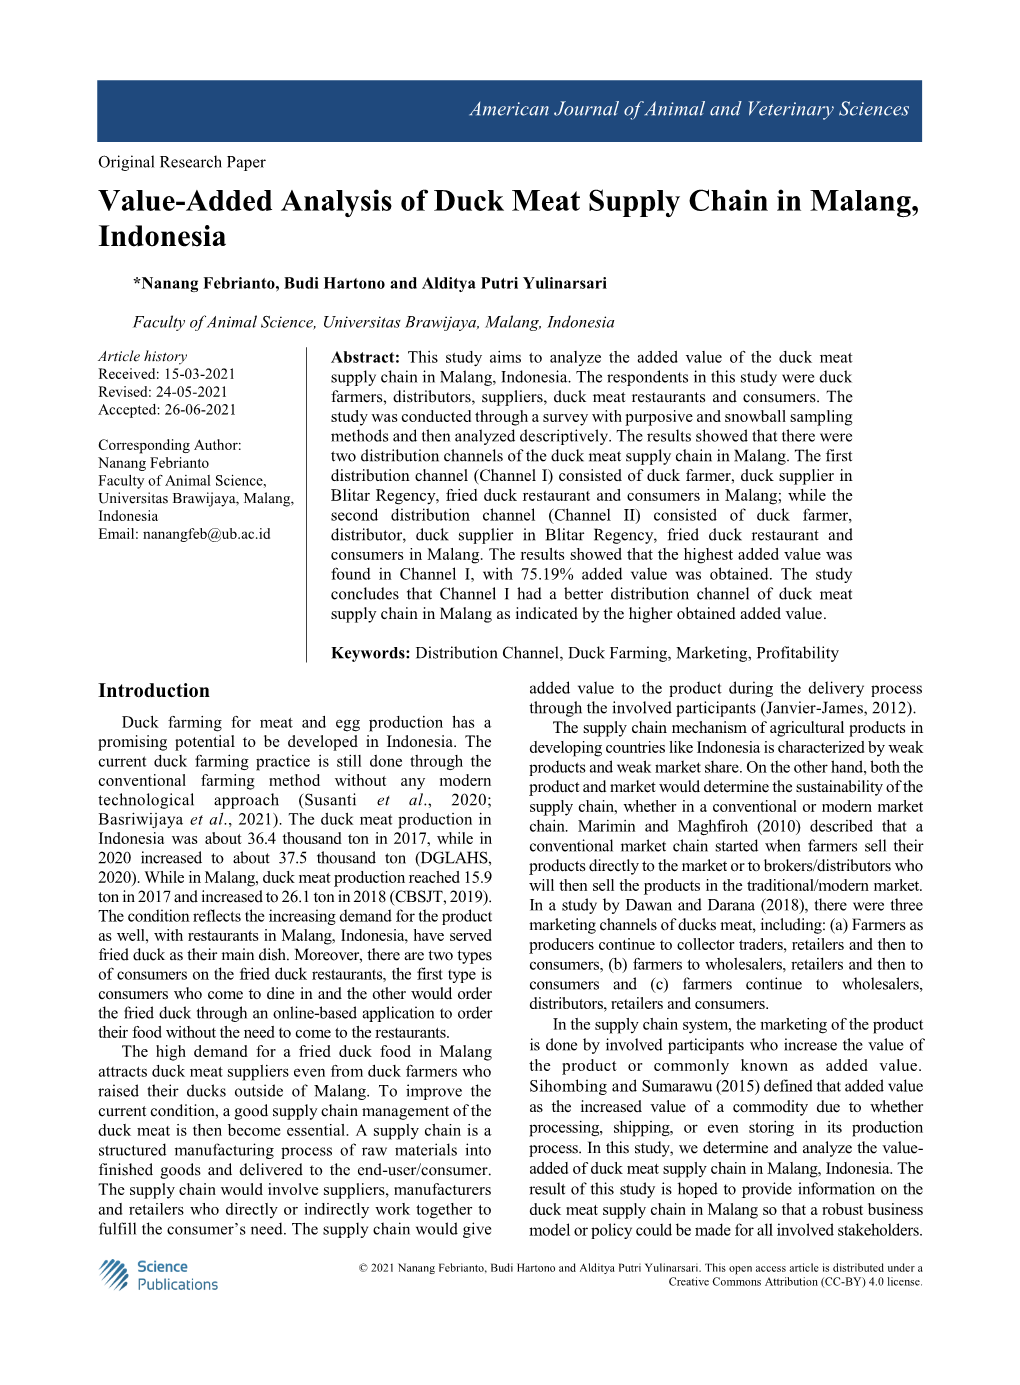 Value-Added Analysis of Duck Meat Supply Chain in Malang, Indonesia